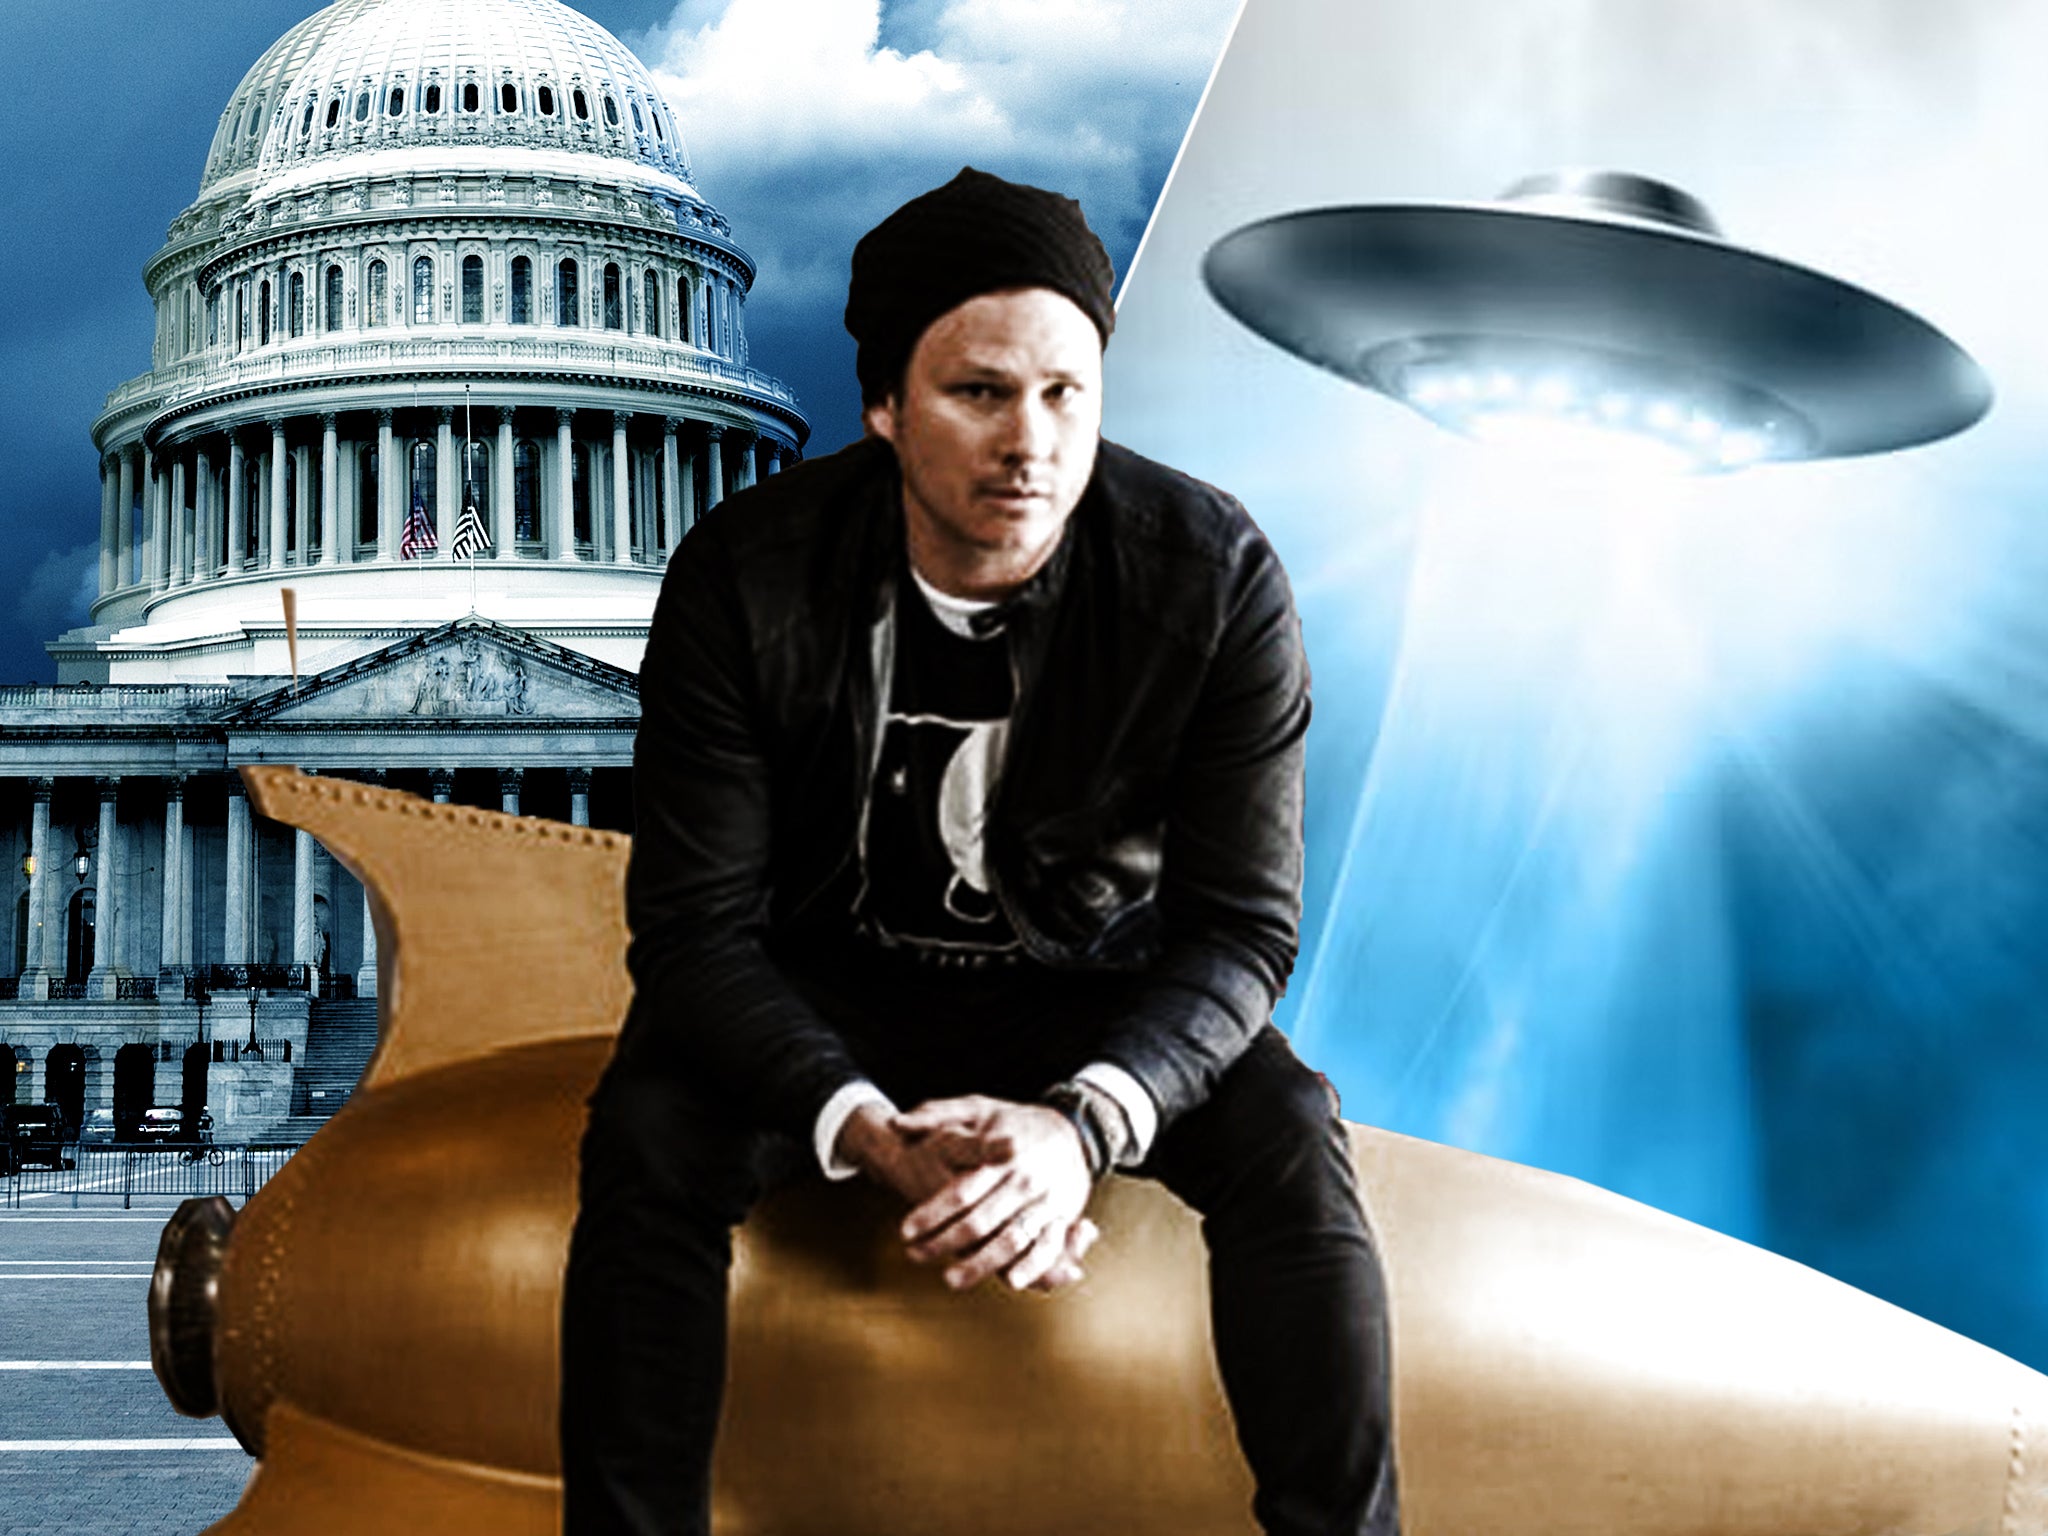 Did Tom DeLonge include a picture of a real alien in his new movie